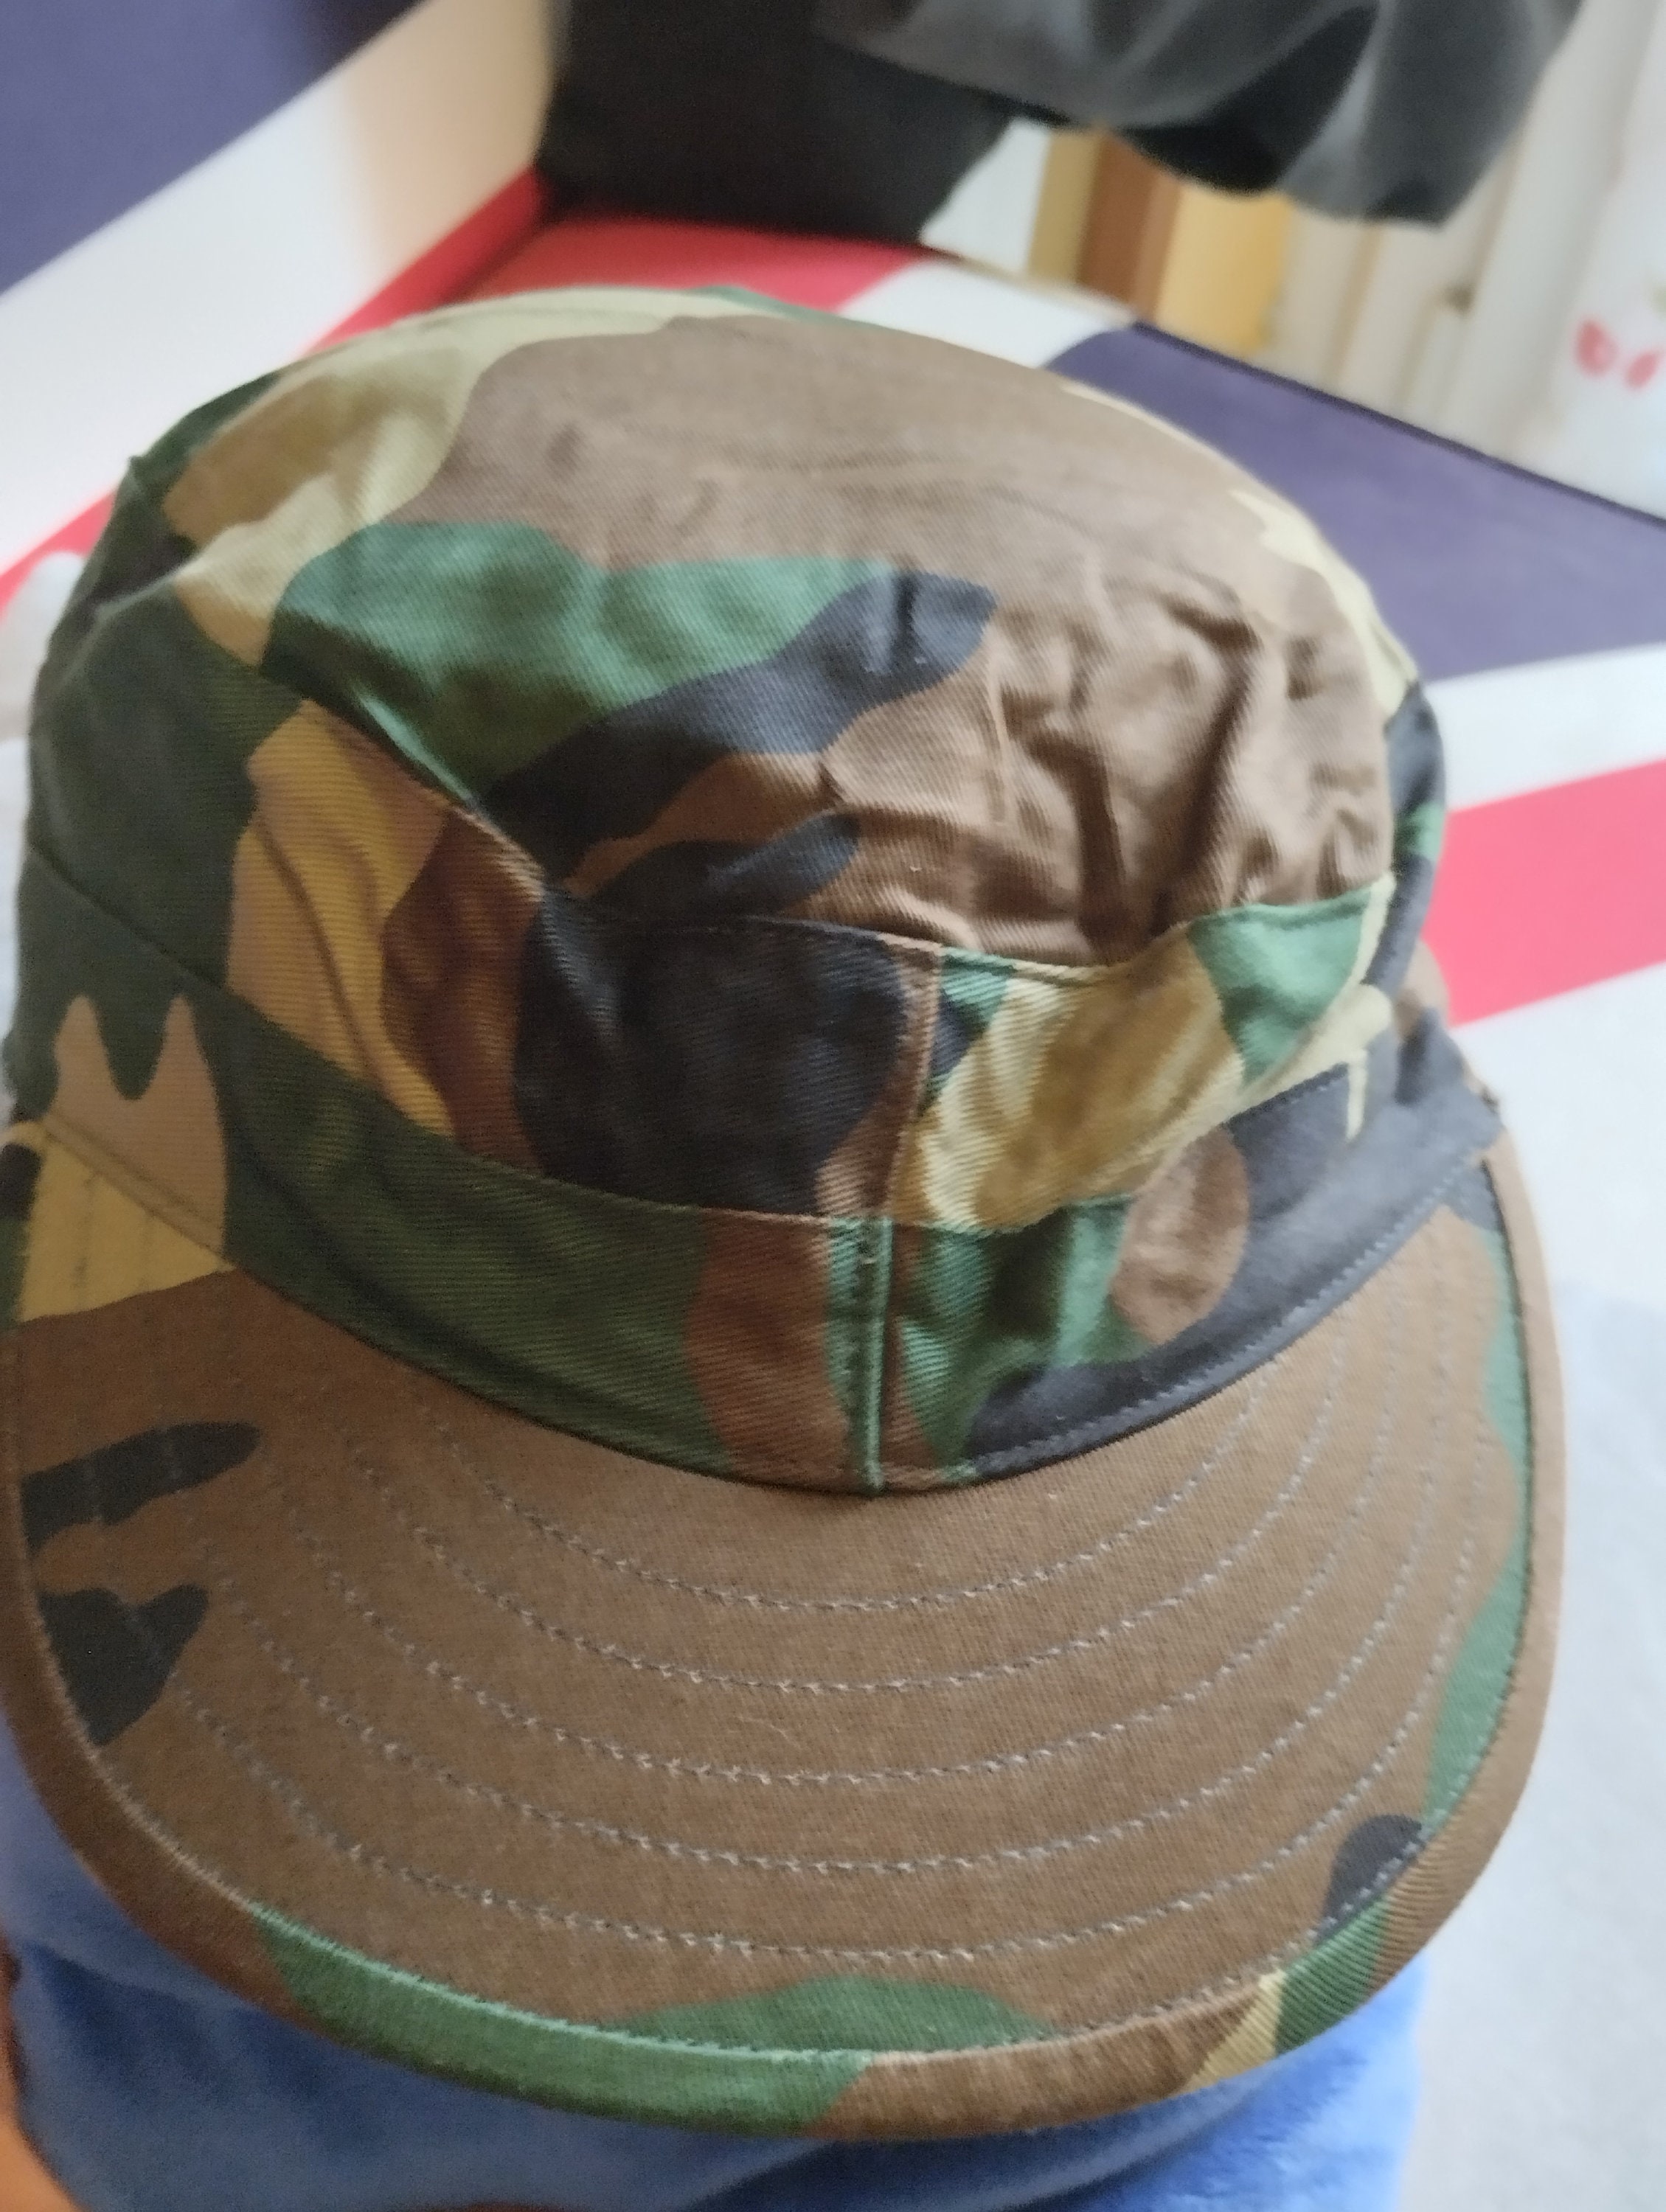 Camouflage Camo Bucket Hats Caps Hunting Gaming Fishing Military Unisex, XL (7 3/8) / Gray Pixel